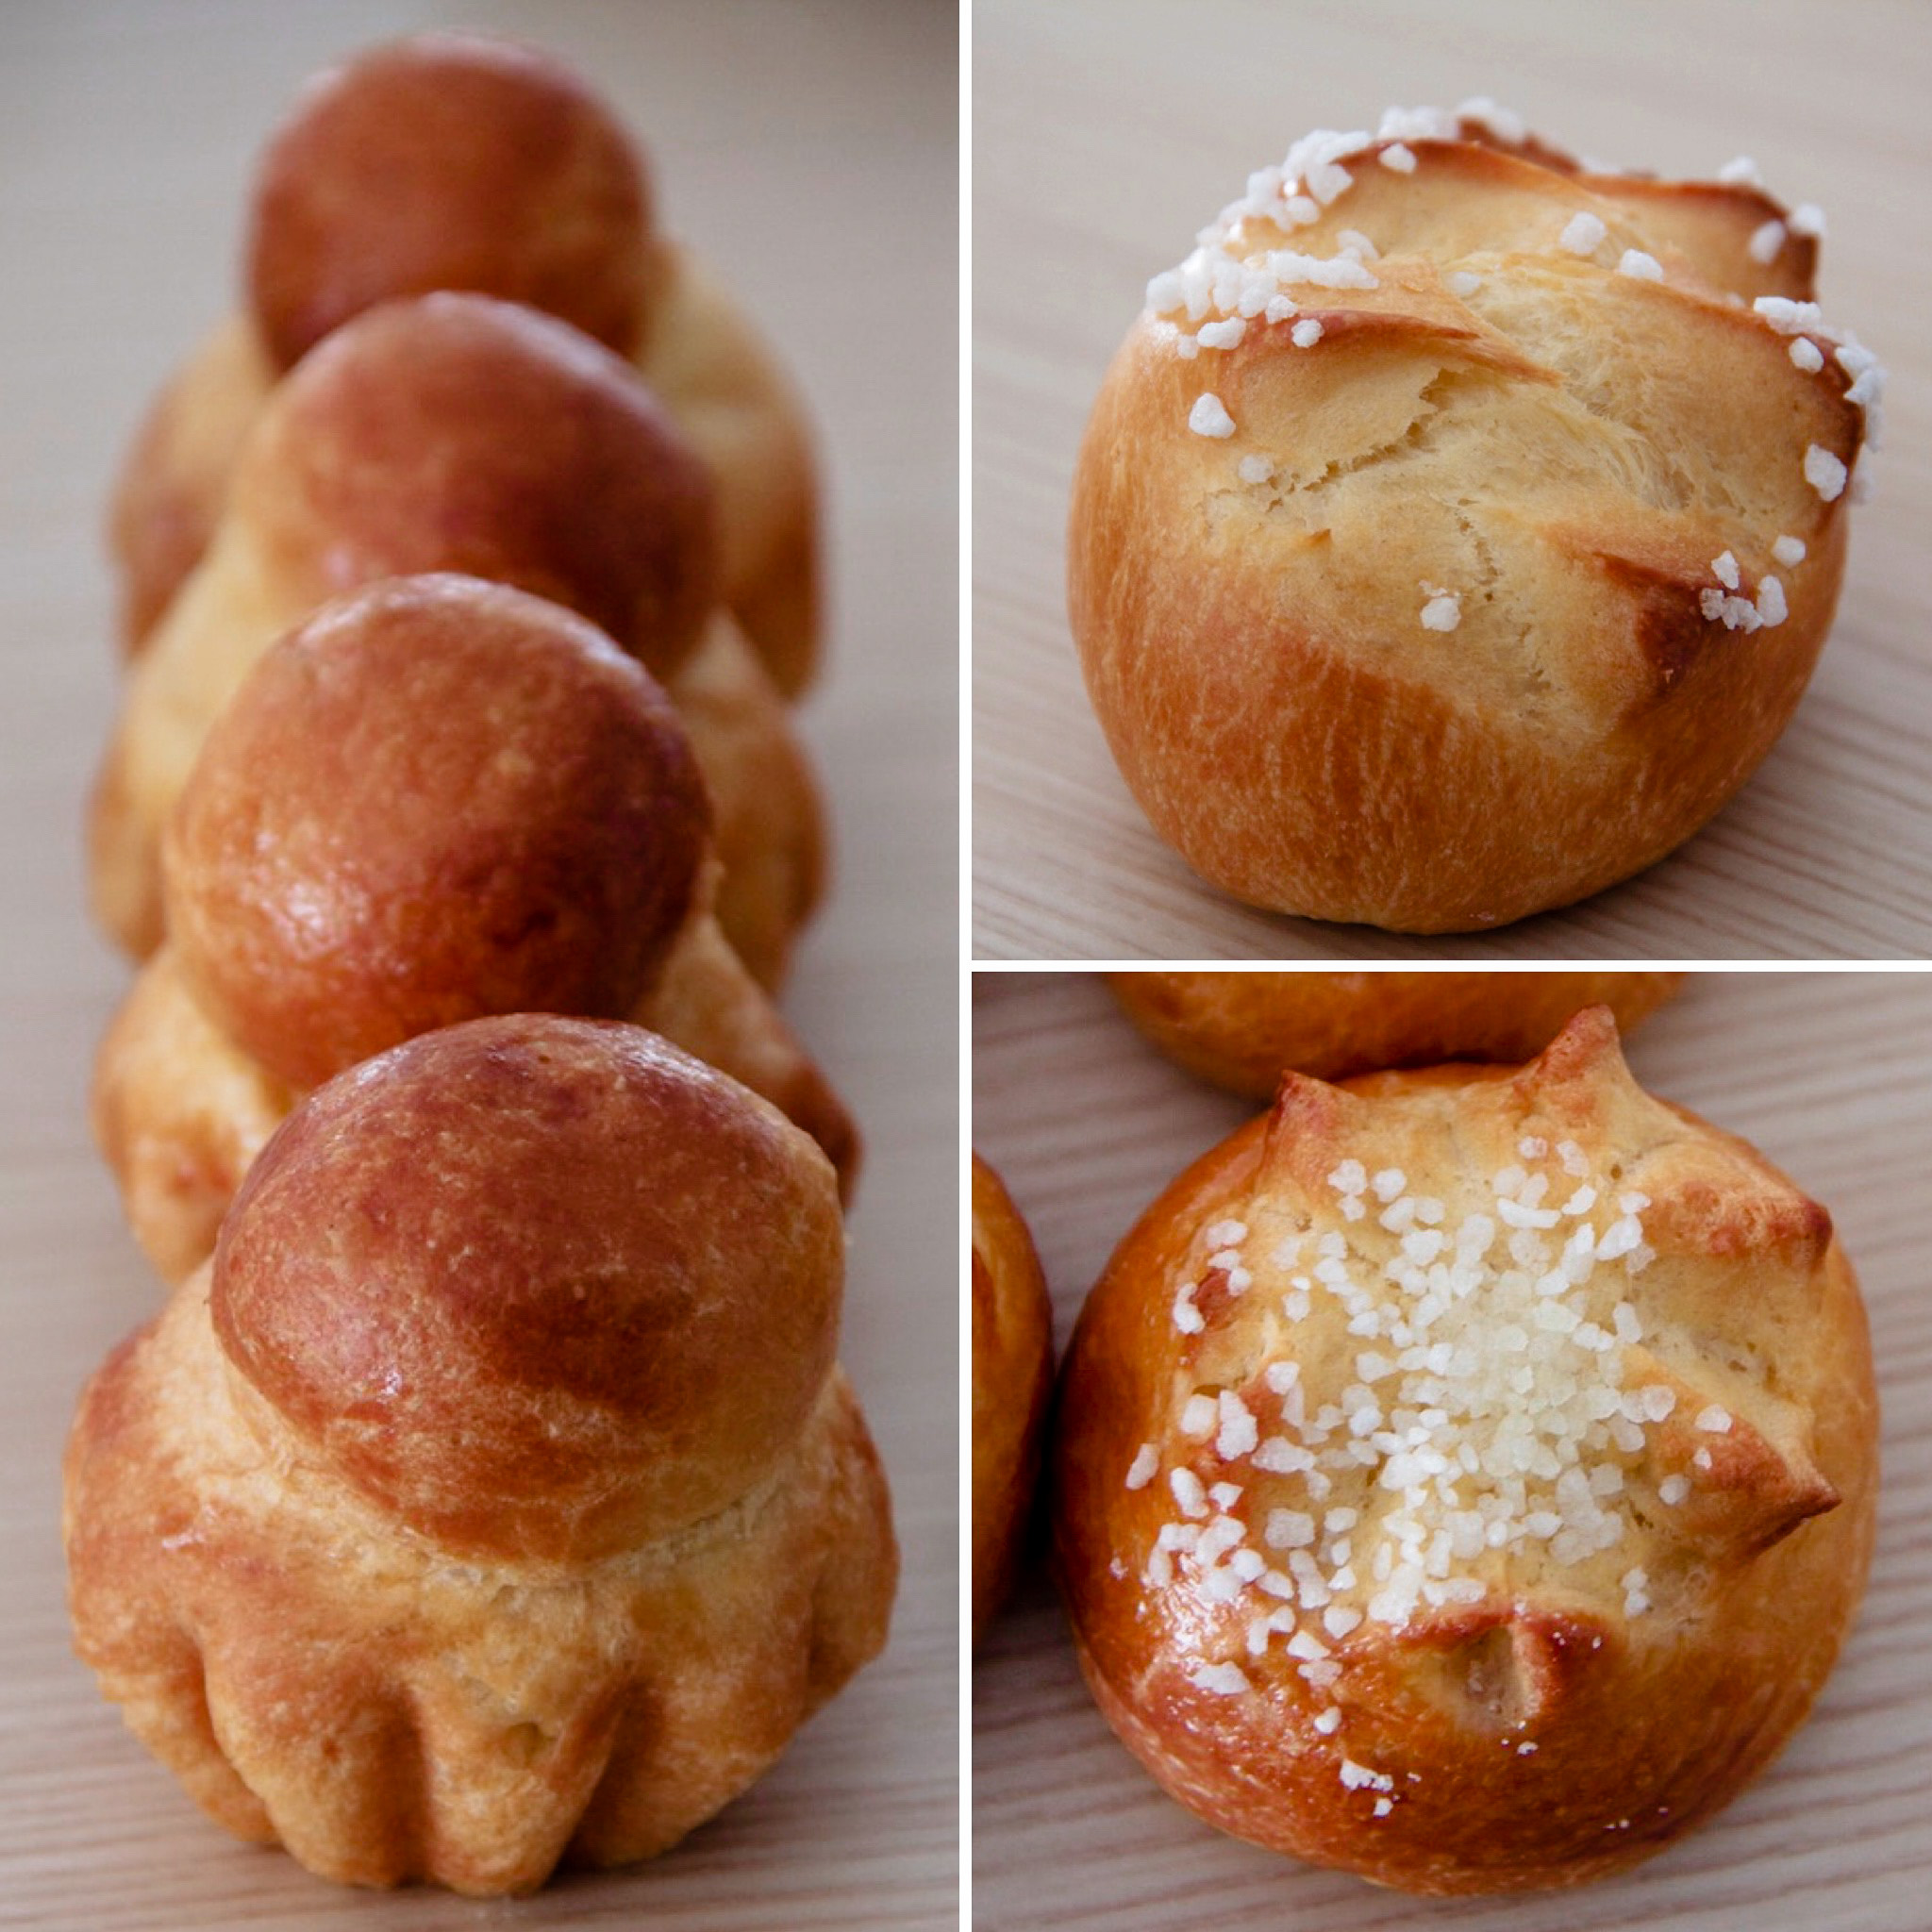 CF0DB735 2ADD 43BF 9C4C D6CD3A25D026 - La recette de brioche ultime.